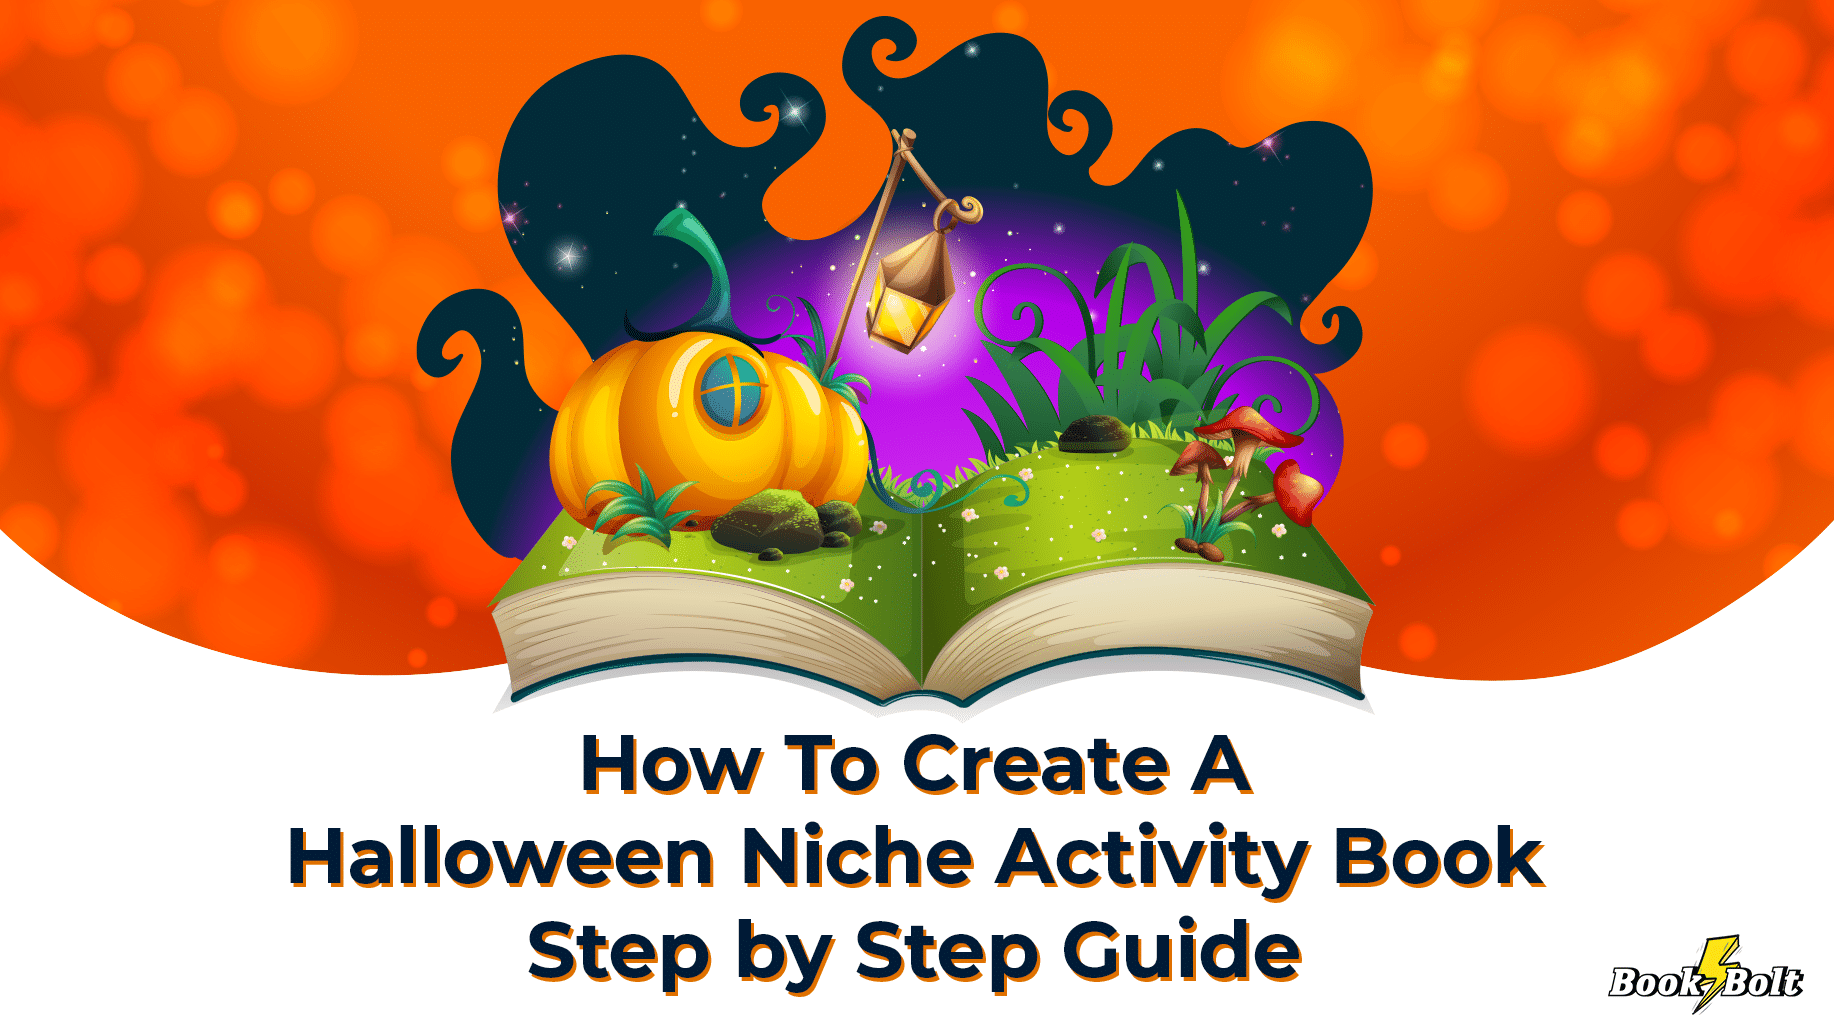 Download How To Create A Halloween Niche Activity Book - Step by Step Guide - Book Bolt